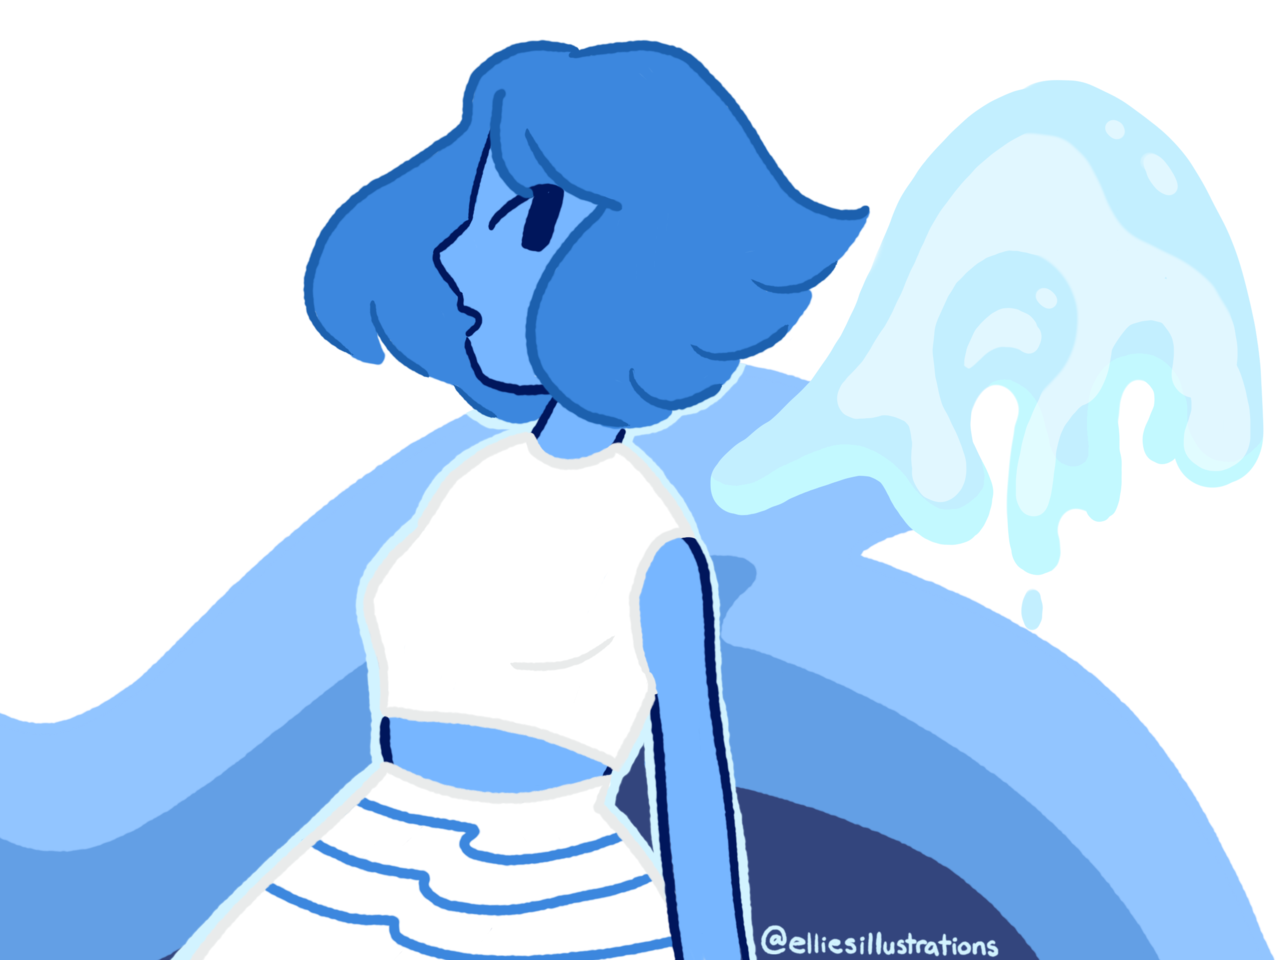 Summer Lapis I wanted to experiment with a monochrome palette. Maybe I’ll do more monochrome gems in casual outfits!